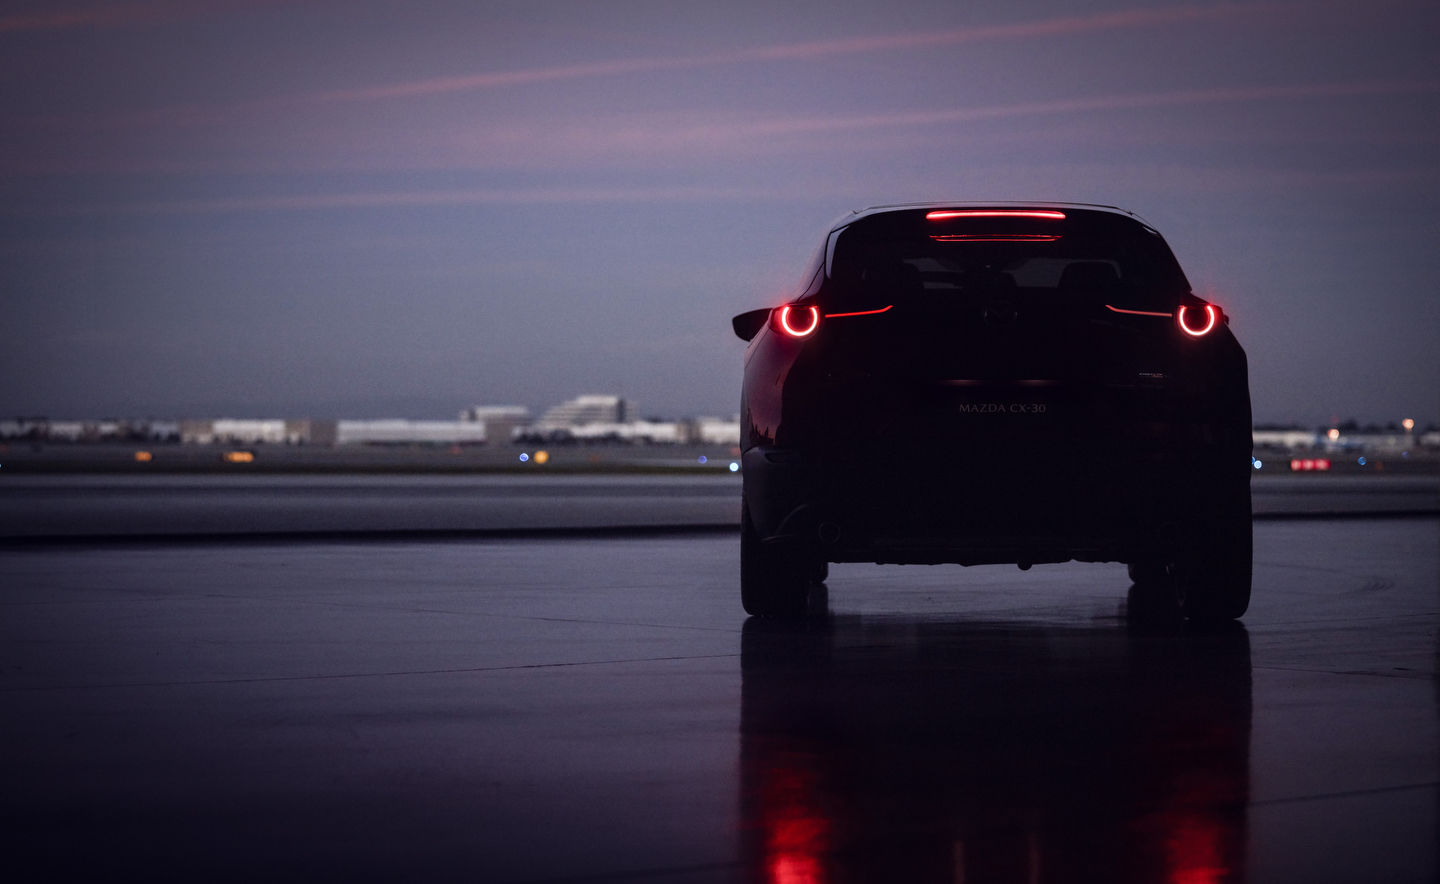 Mazda announces three new sport utility vehicles coming in 2022